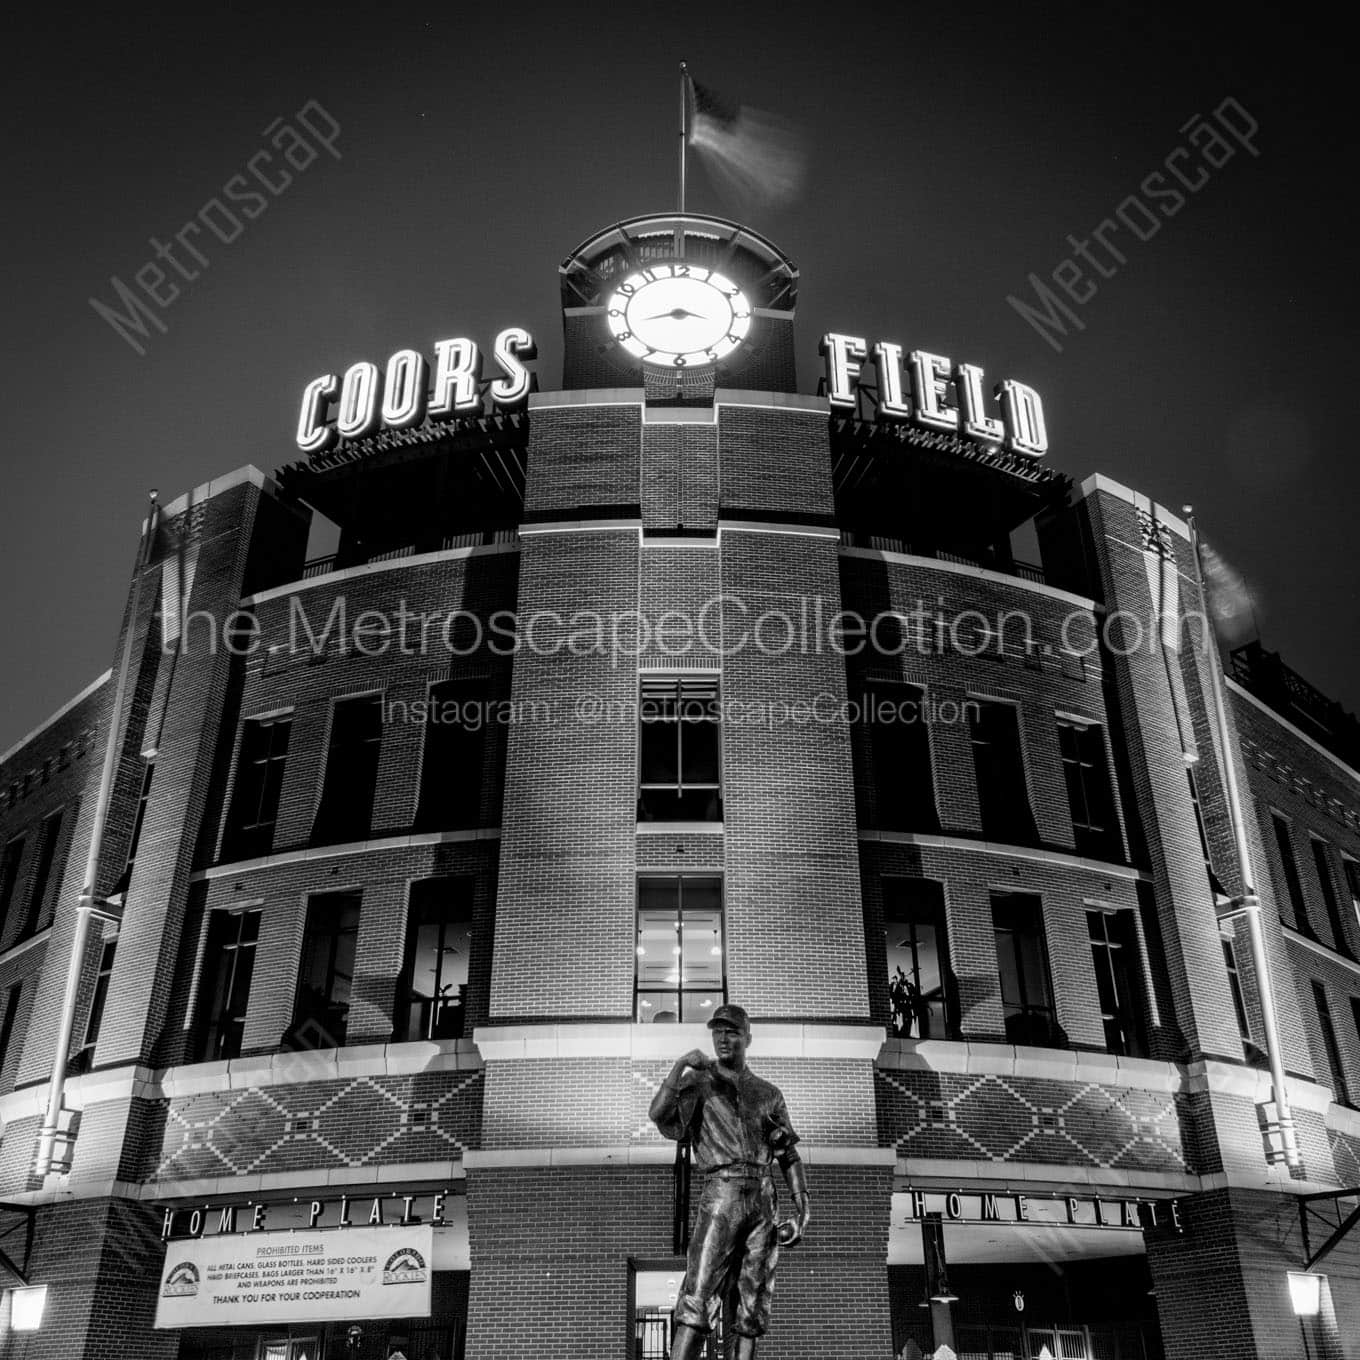 coors field at night Black & White Office Art